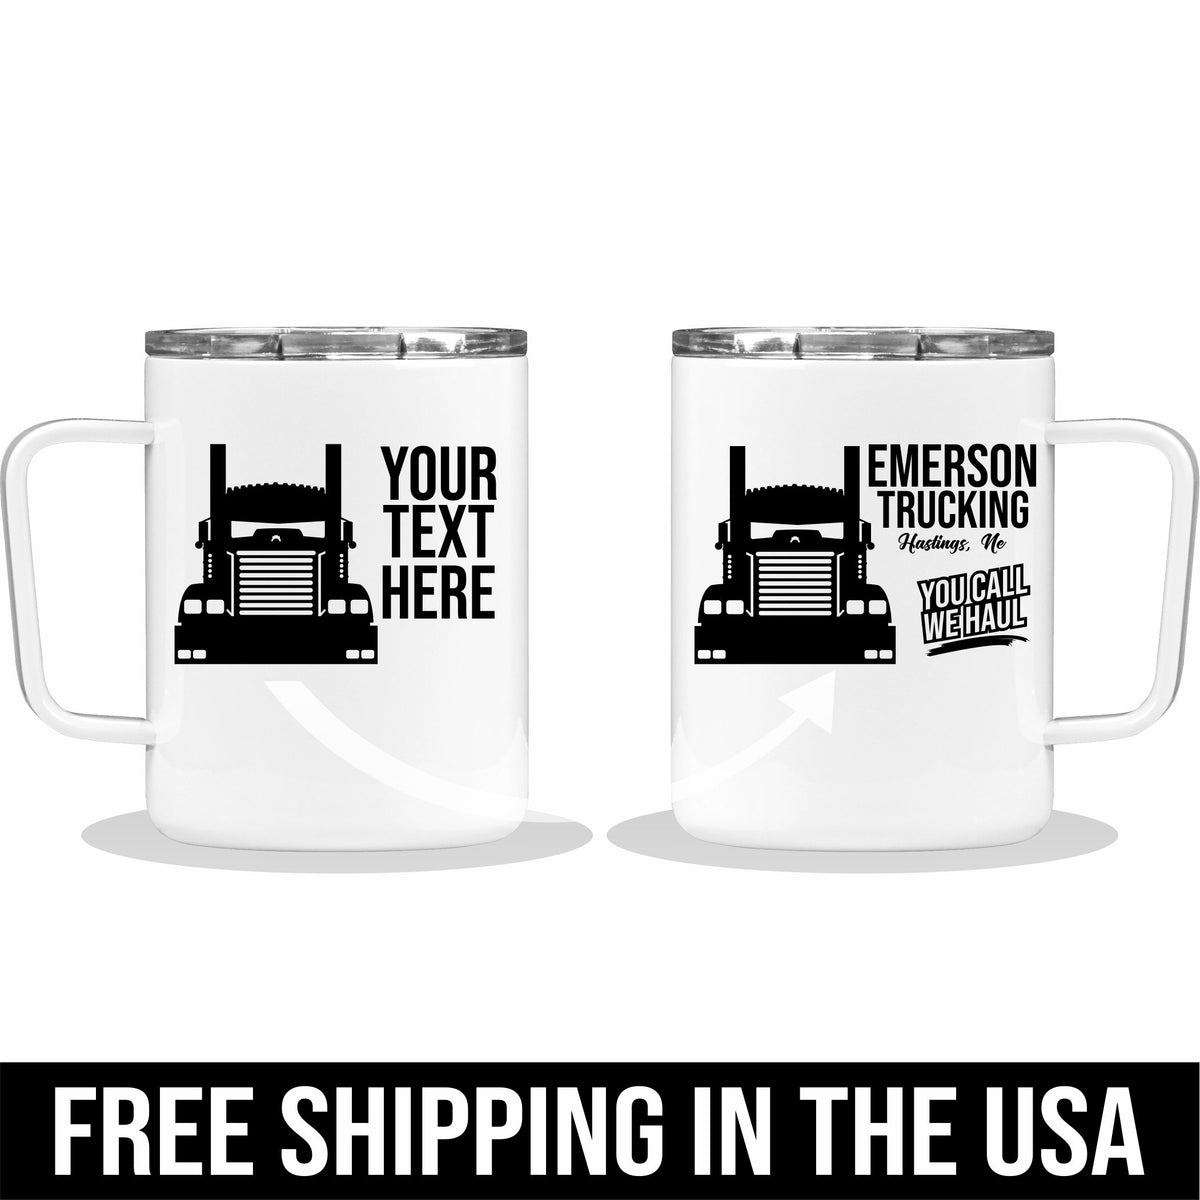 KW 900 Your Text Here Insulated Coffee Mug Free Shipping